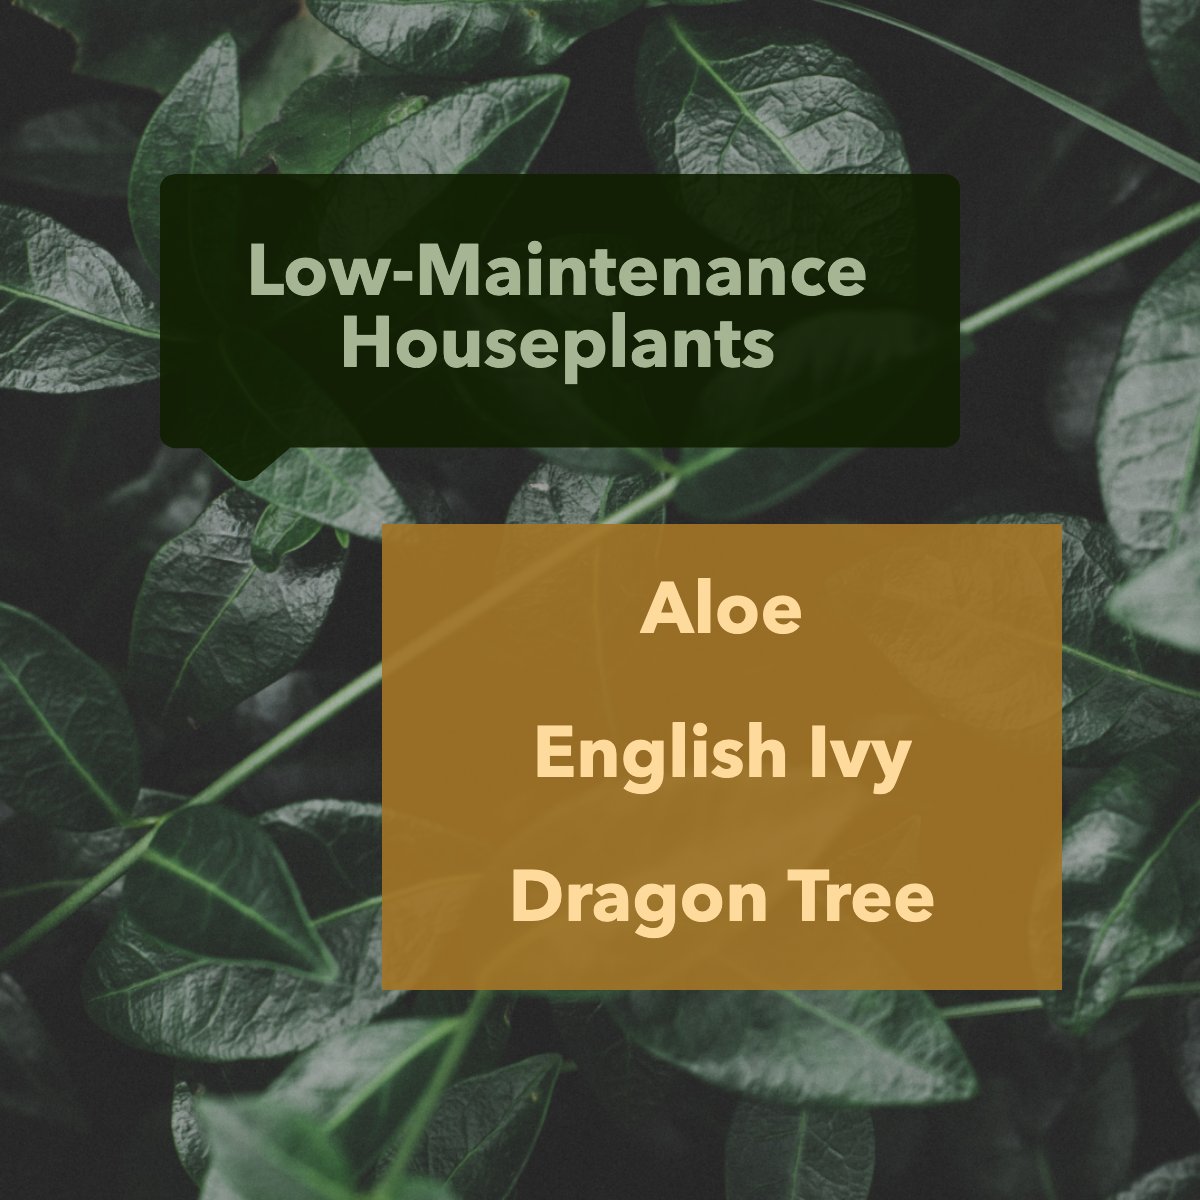 Feeling a little 'blah' 😕? Spruce up your space with gorgeous greenery.  🌷

These low-maintenance houseplants make it look easy:

Aloe
English Ivy
Dragon Tree

#plants #plant #plantfacts #houseplants #indoorplants #green #leaves
 #realestate #makememove